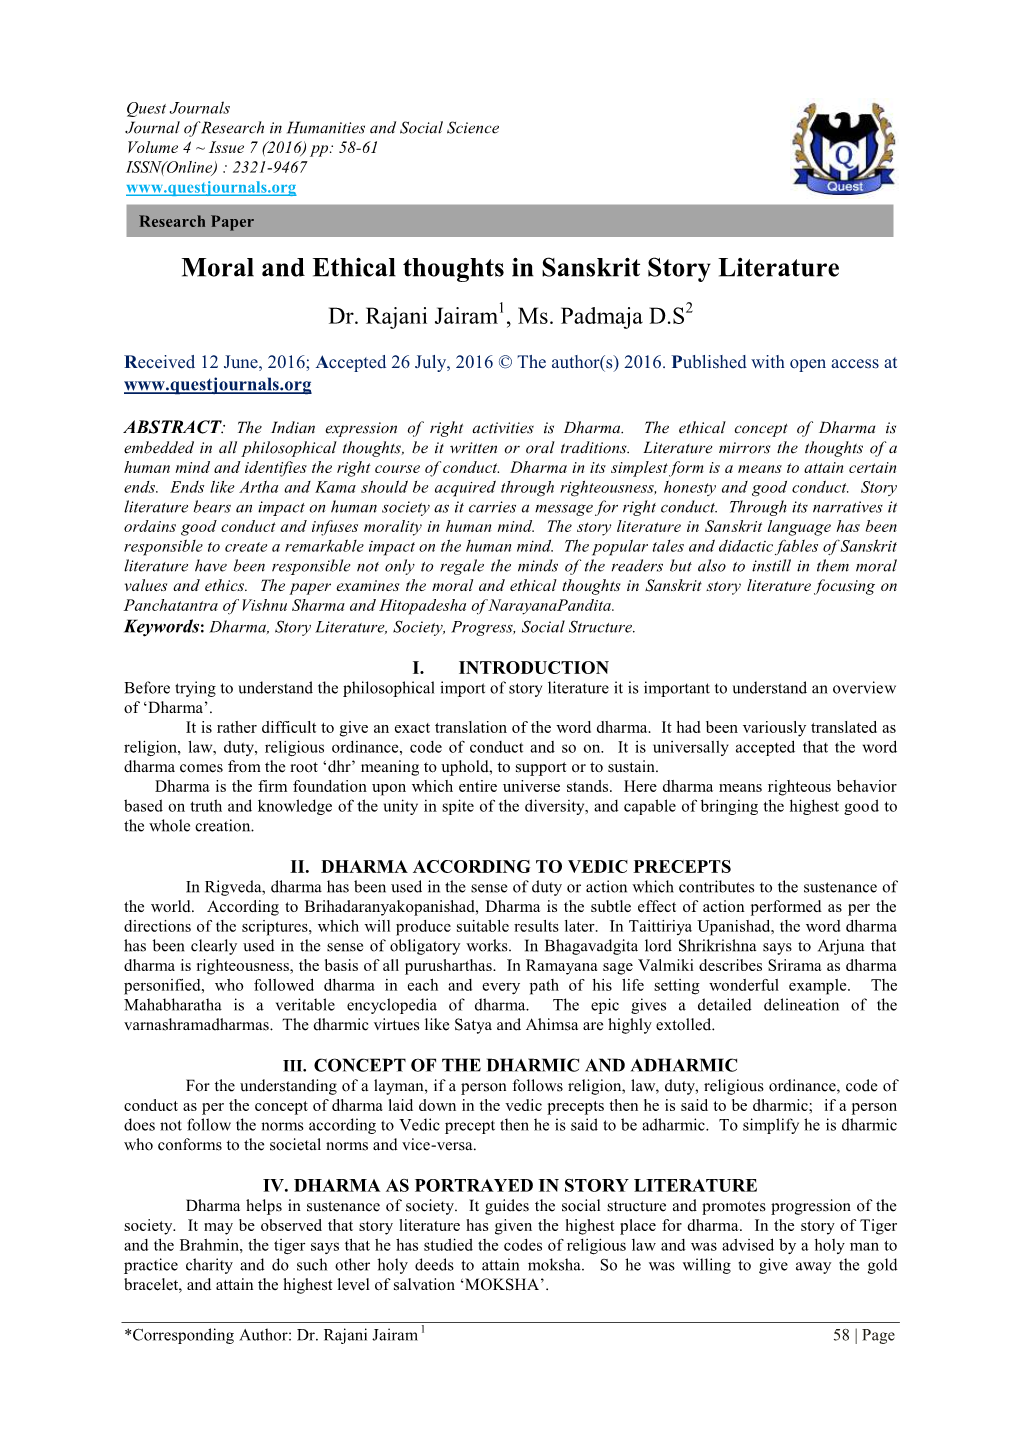 Moral and Ethical Thoughts in Sanskrit Story Literature